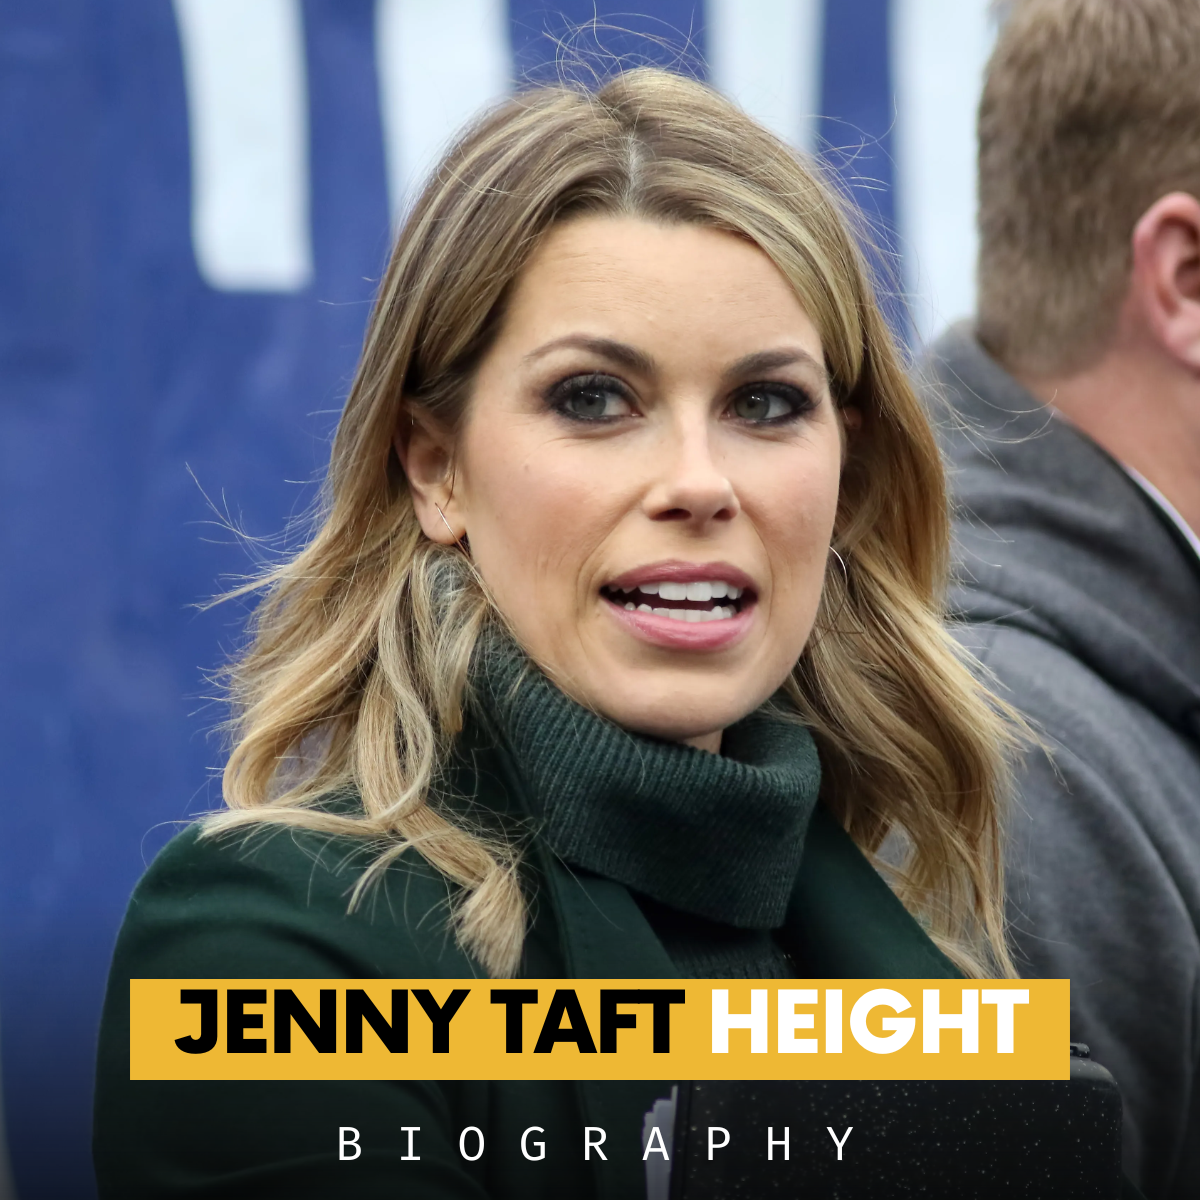 What Is Jenny Taft Height? How Tall Is He?